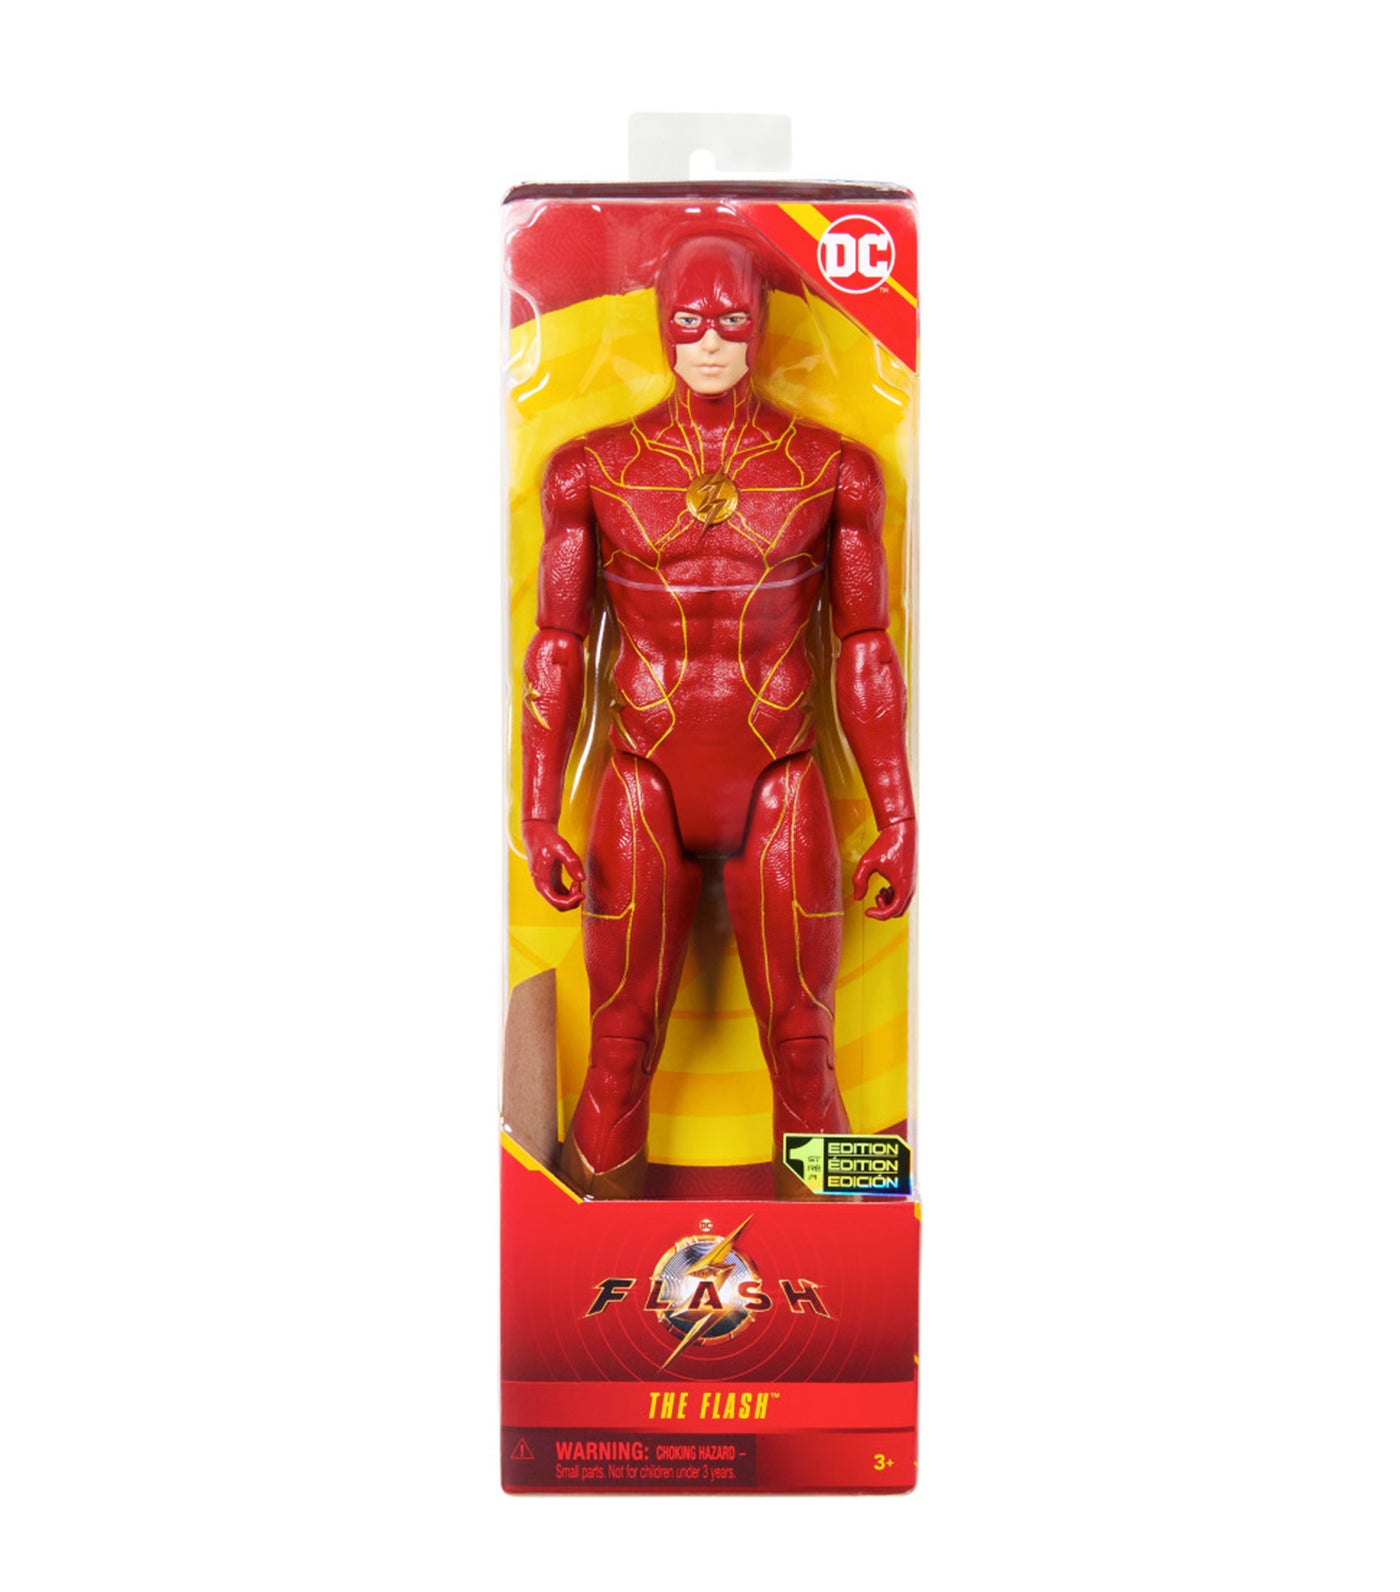 The Flash Movie Collectible: The Flash 12-Inch Action Figure